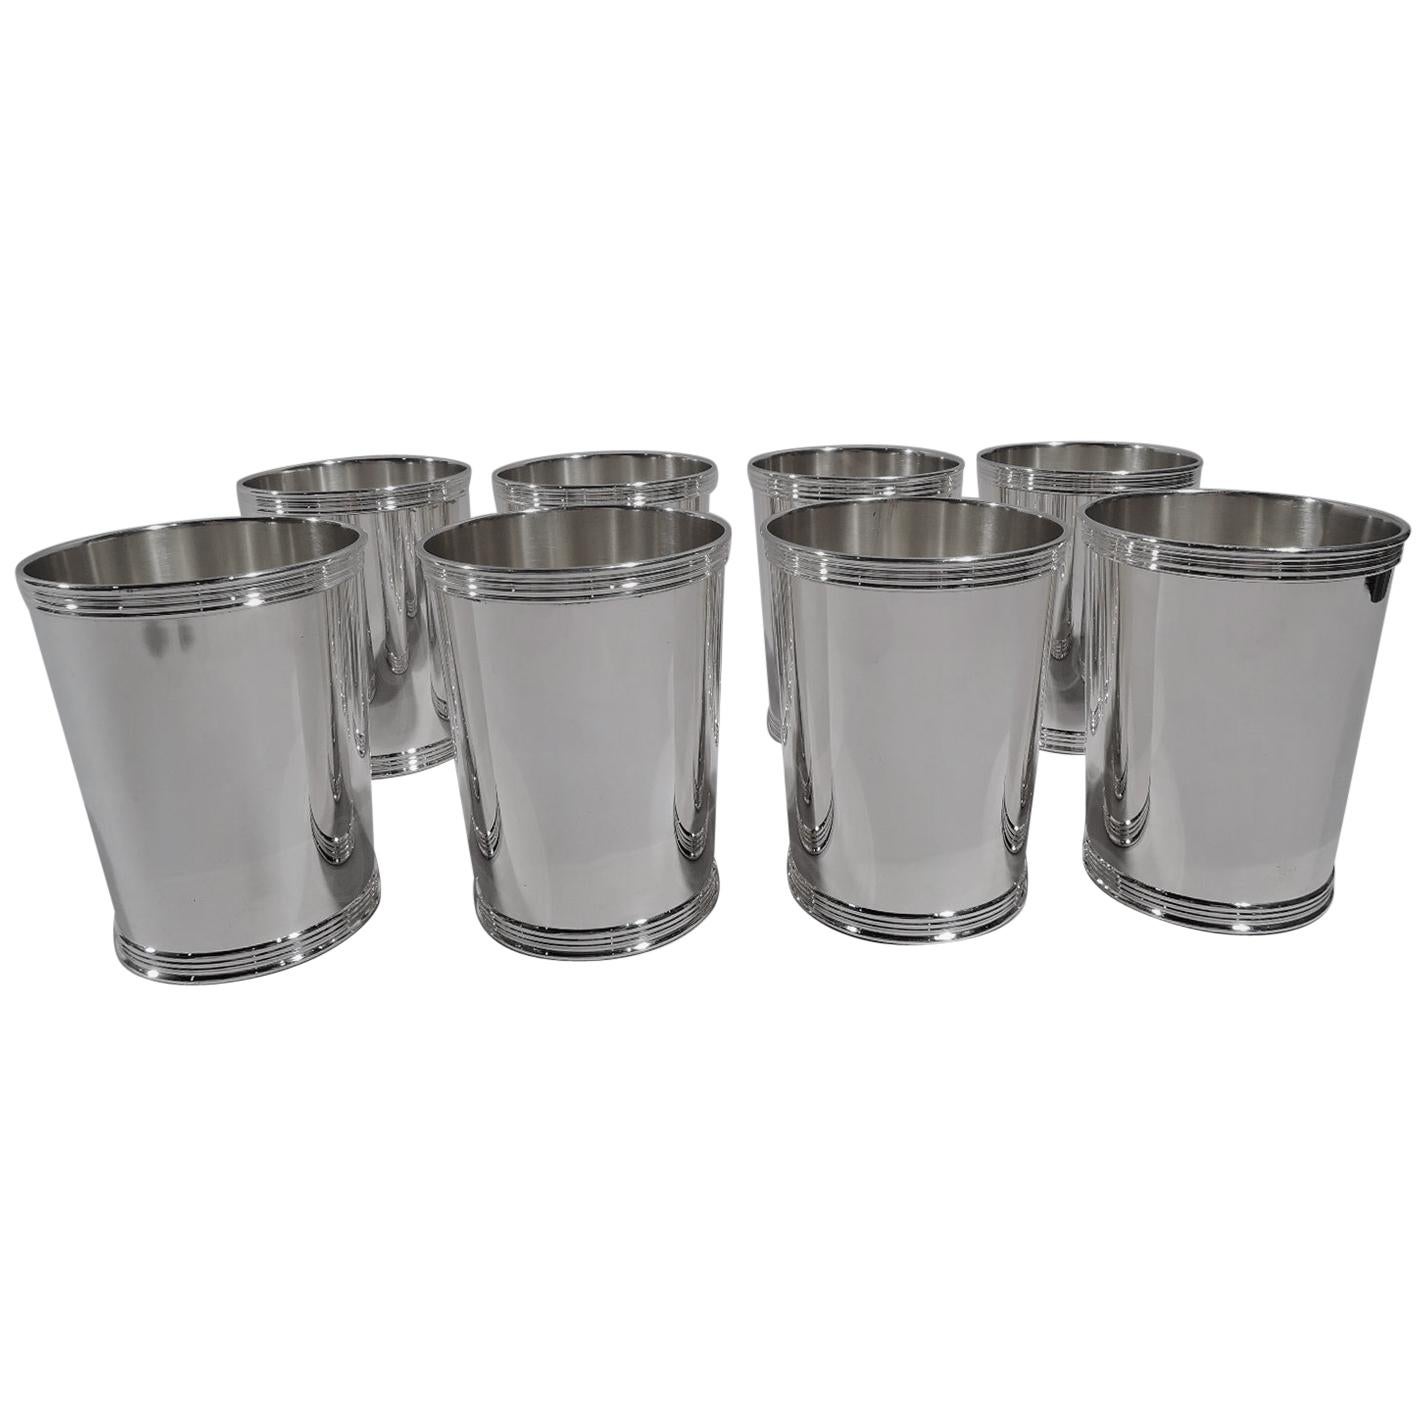 Set of 8 Manchester American Sterling Silver Mint Juleps